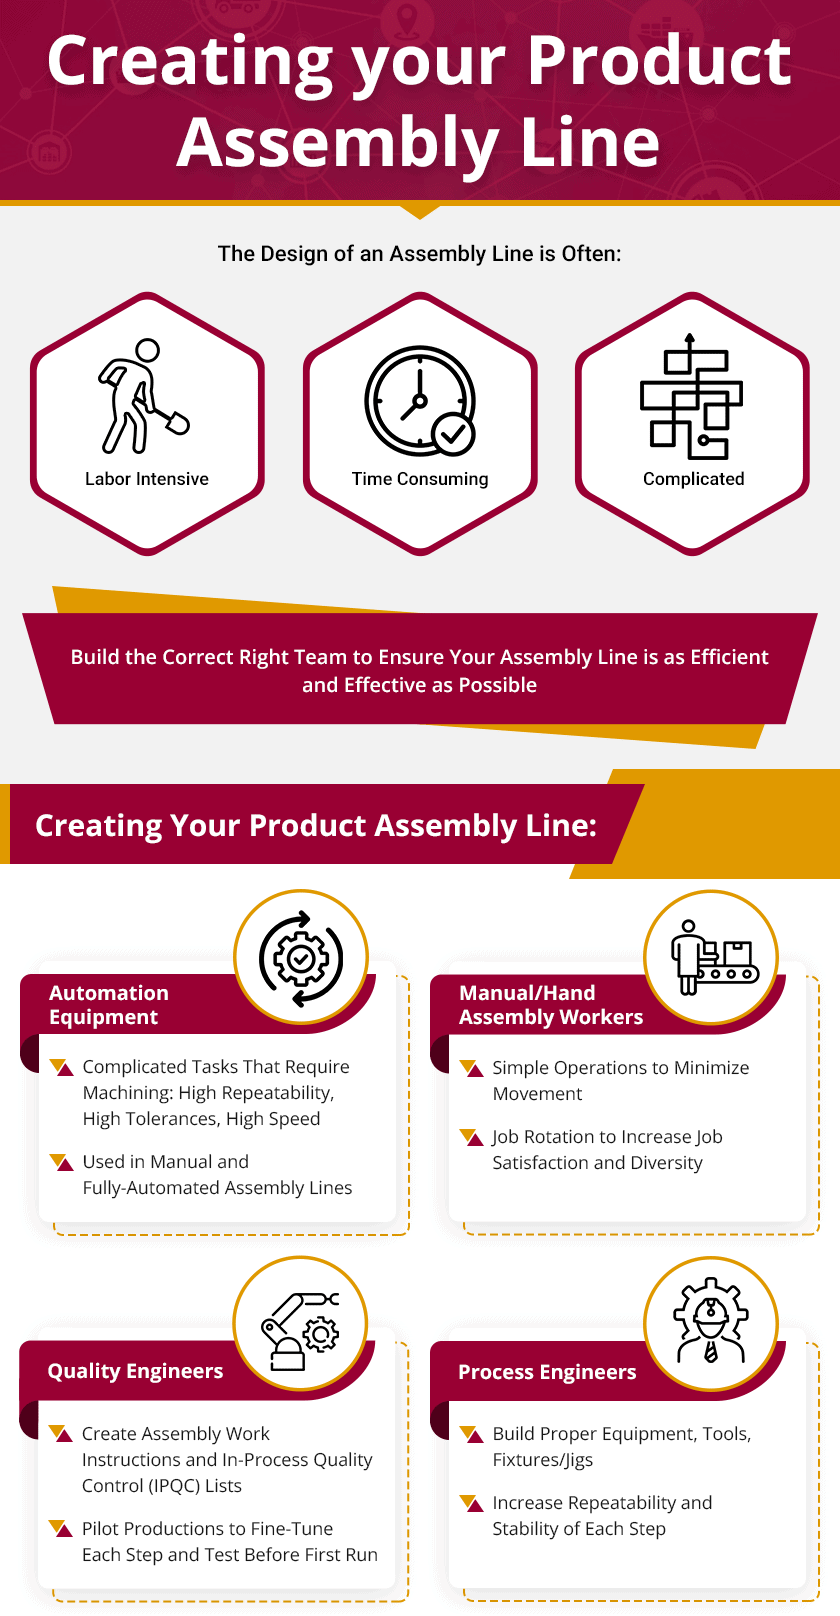 Creating your Product Assembly Line